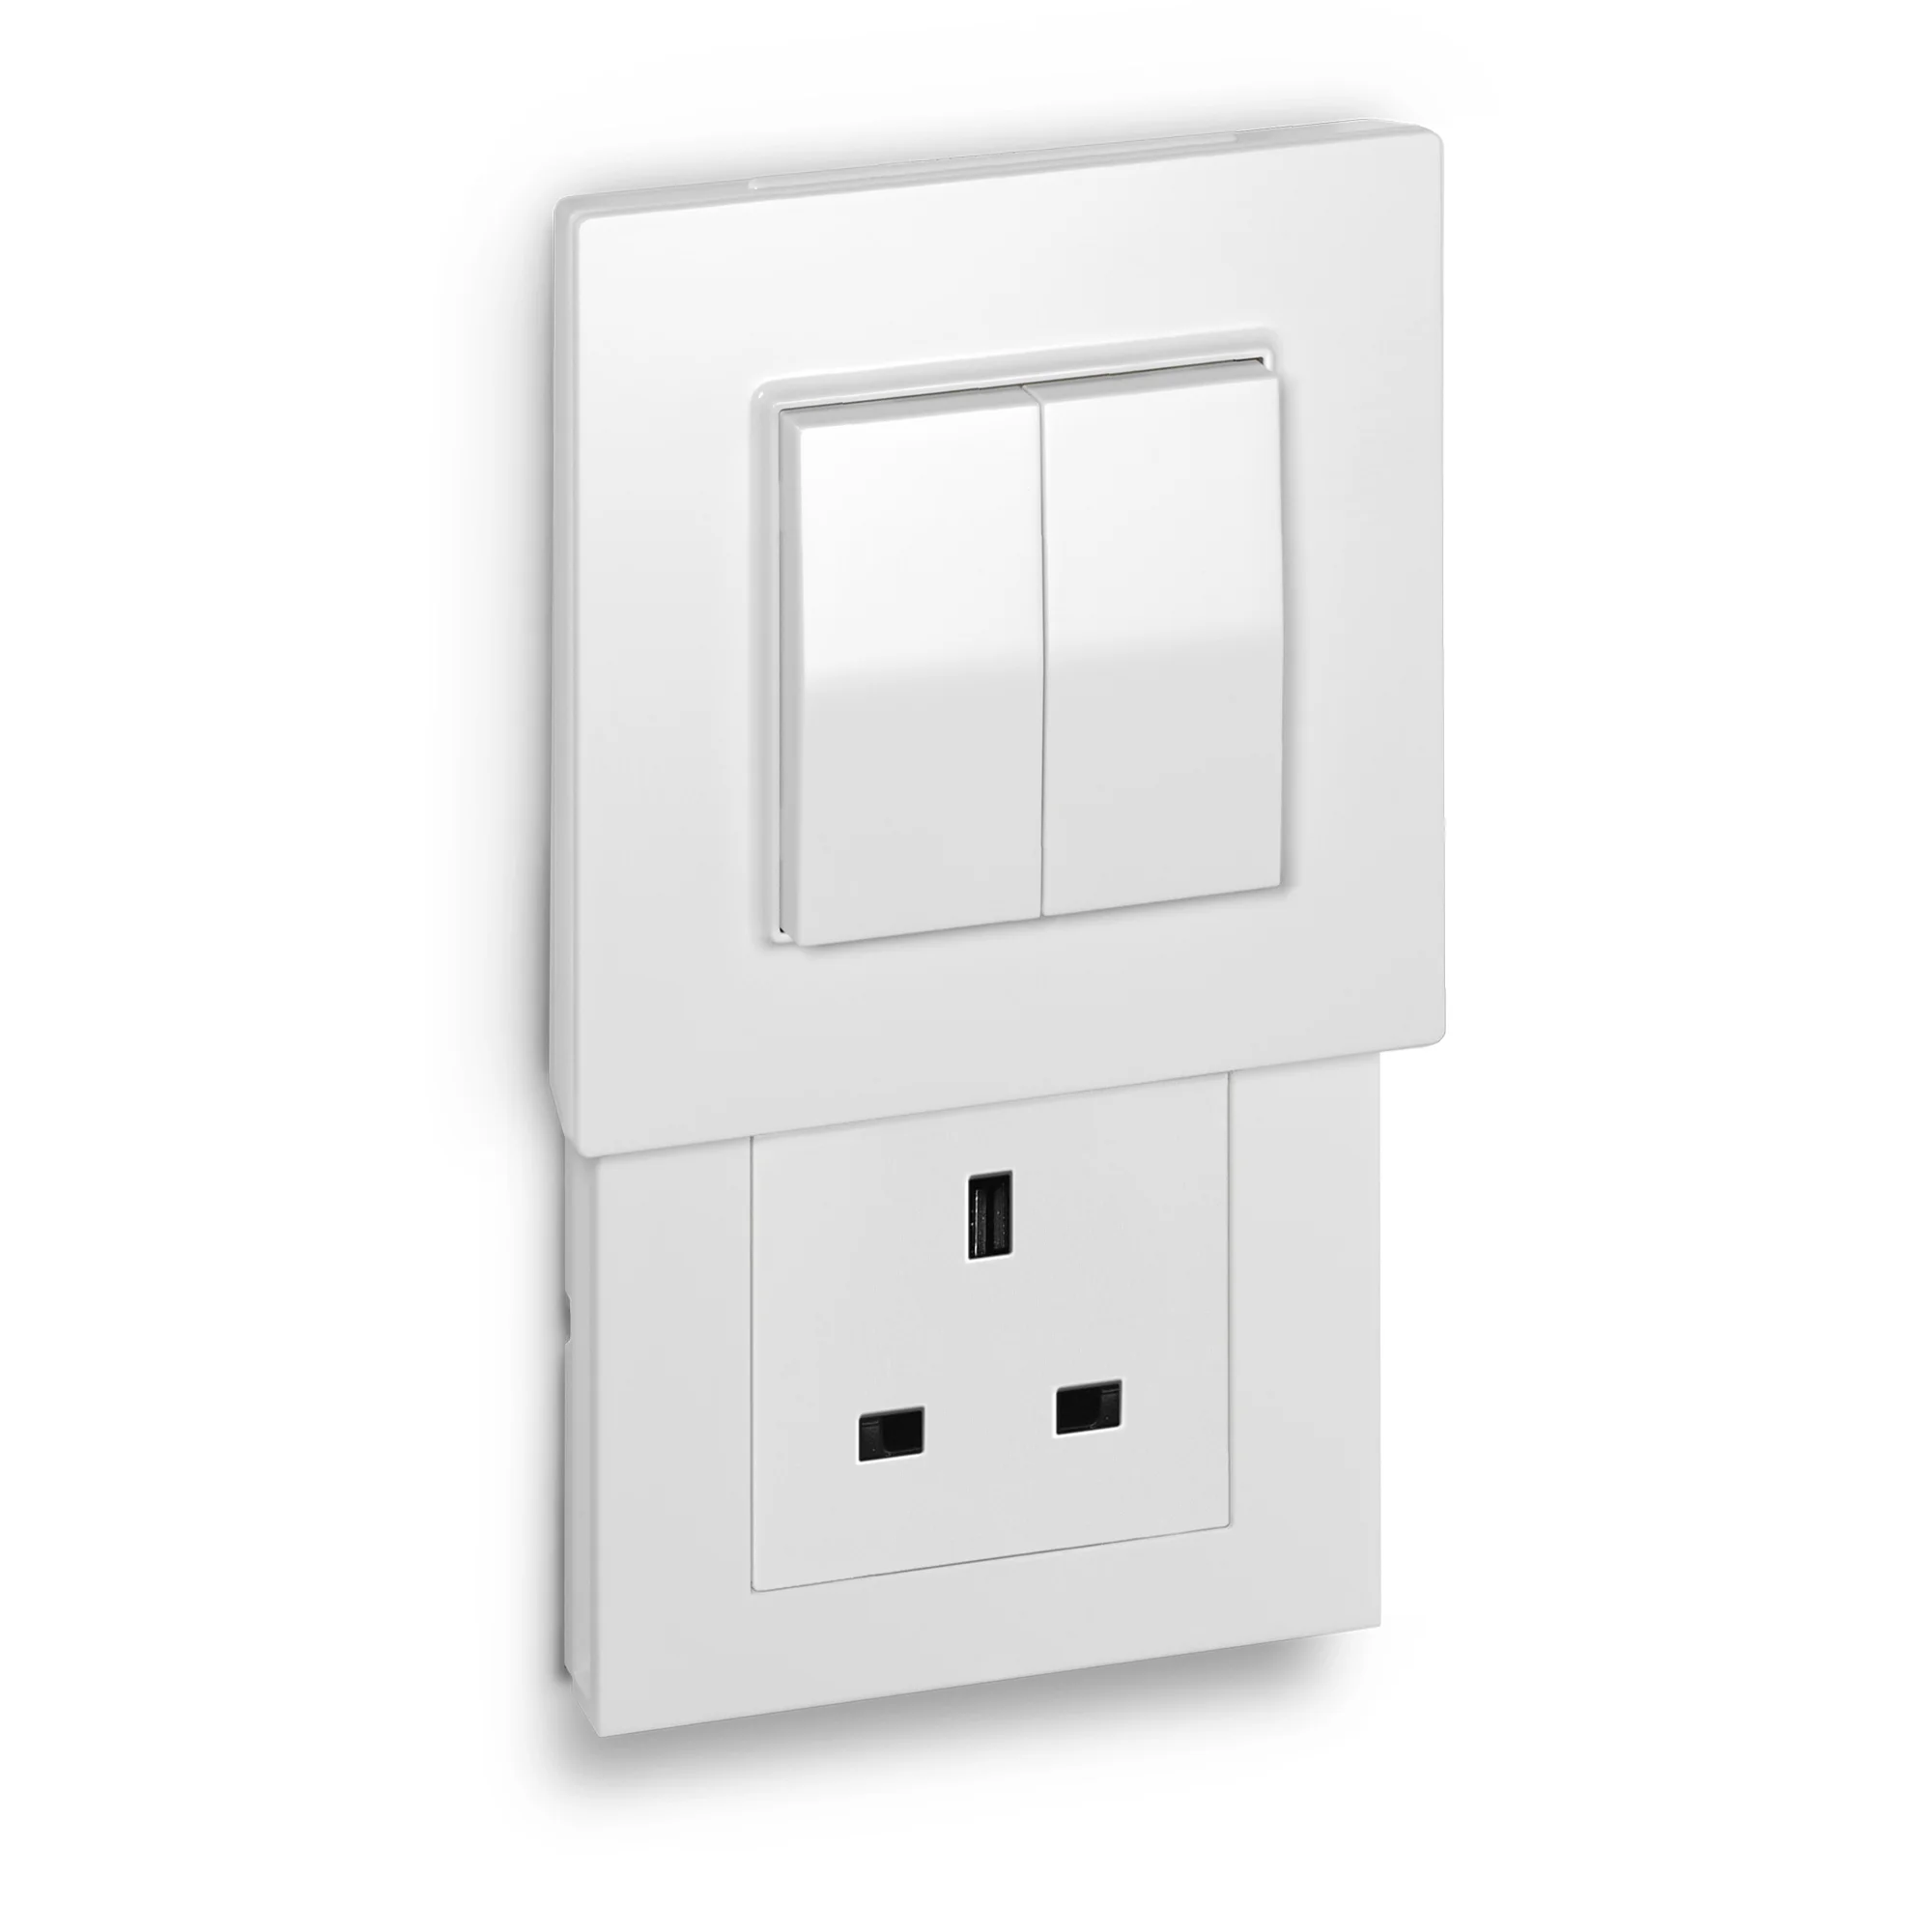 Hidden Socket | Versteckdose® with Friends of Hue switch with socket insert for plug type G (UK)